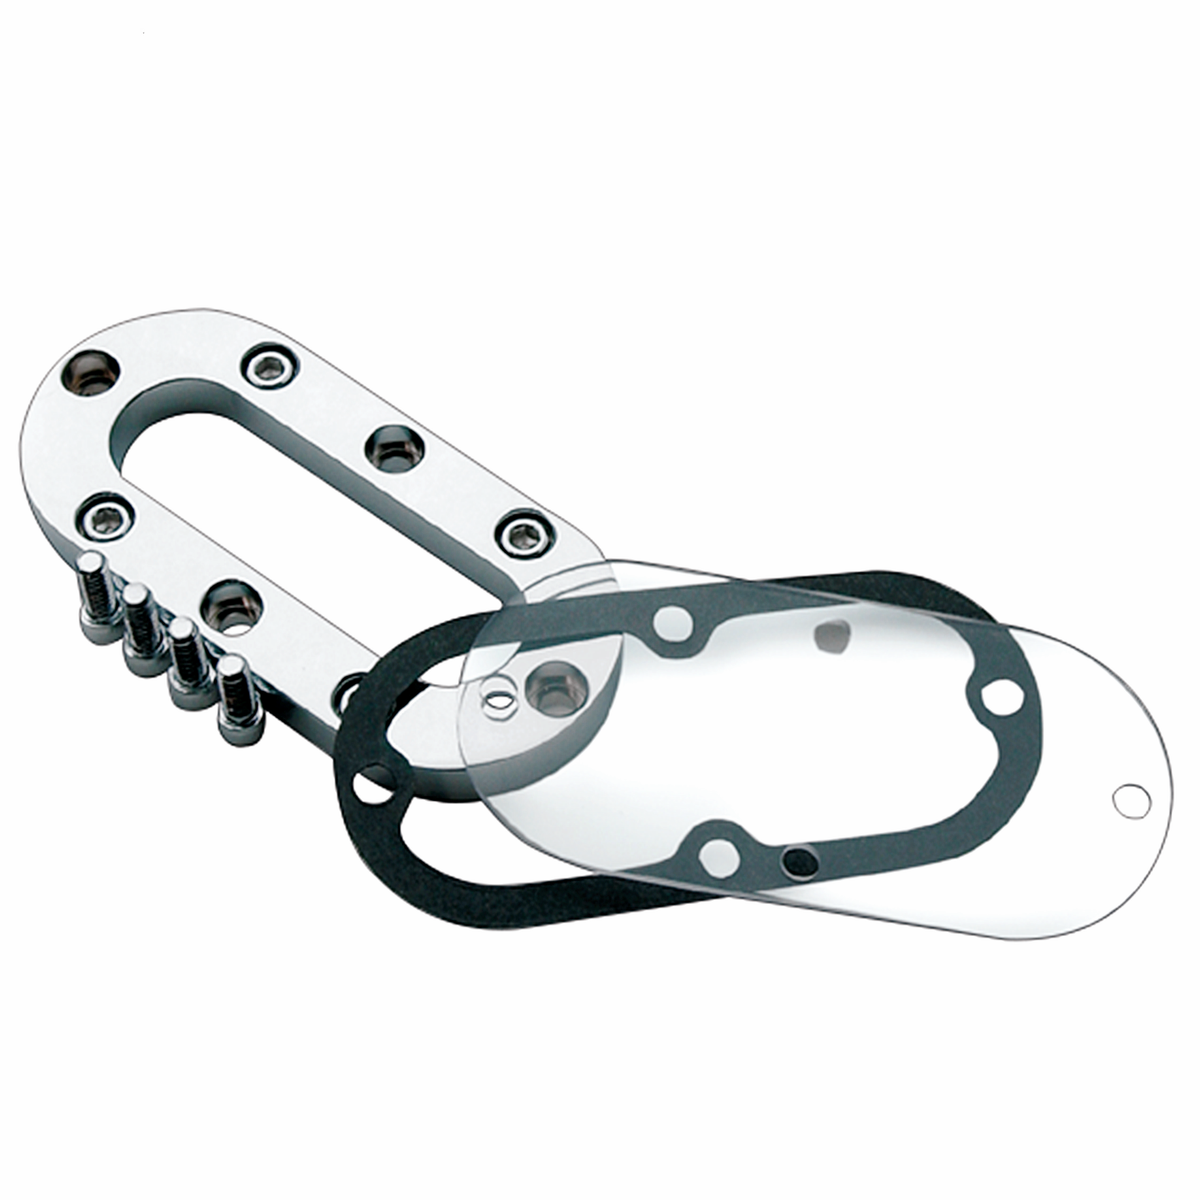 Custom  Chrome Clutch Inspection Cover Fit For Harley FL FX 65-86 Softail Dyna 1984-2006